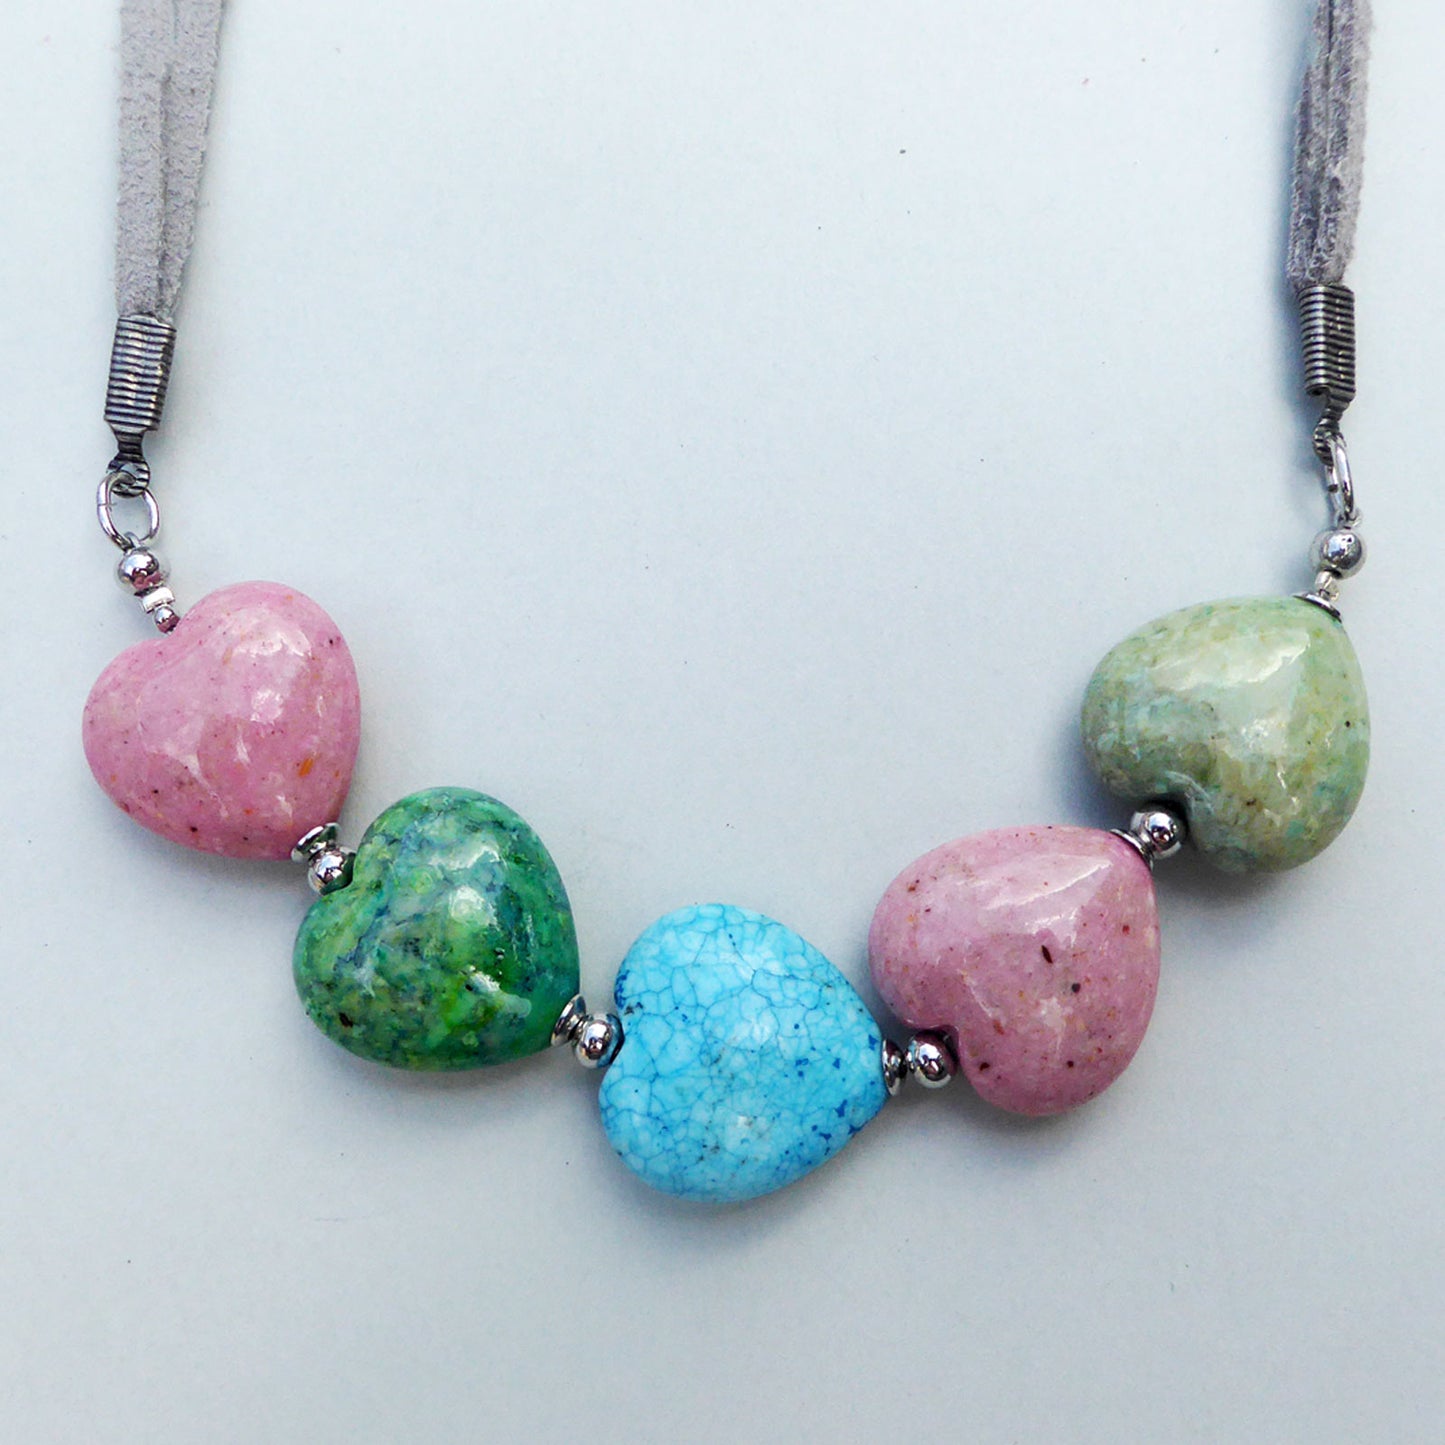 Fossil heart necklace in pink blue and green